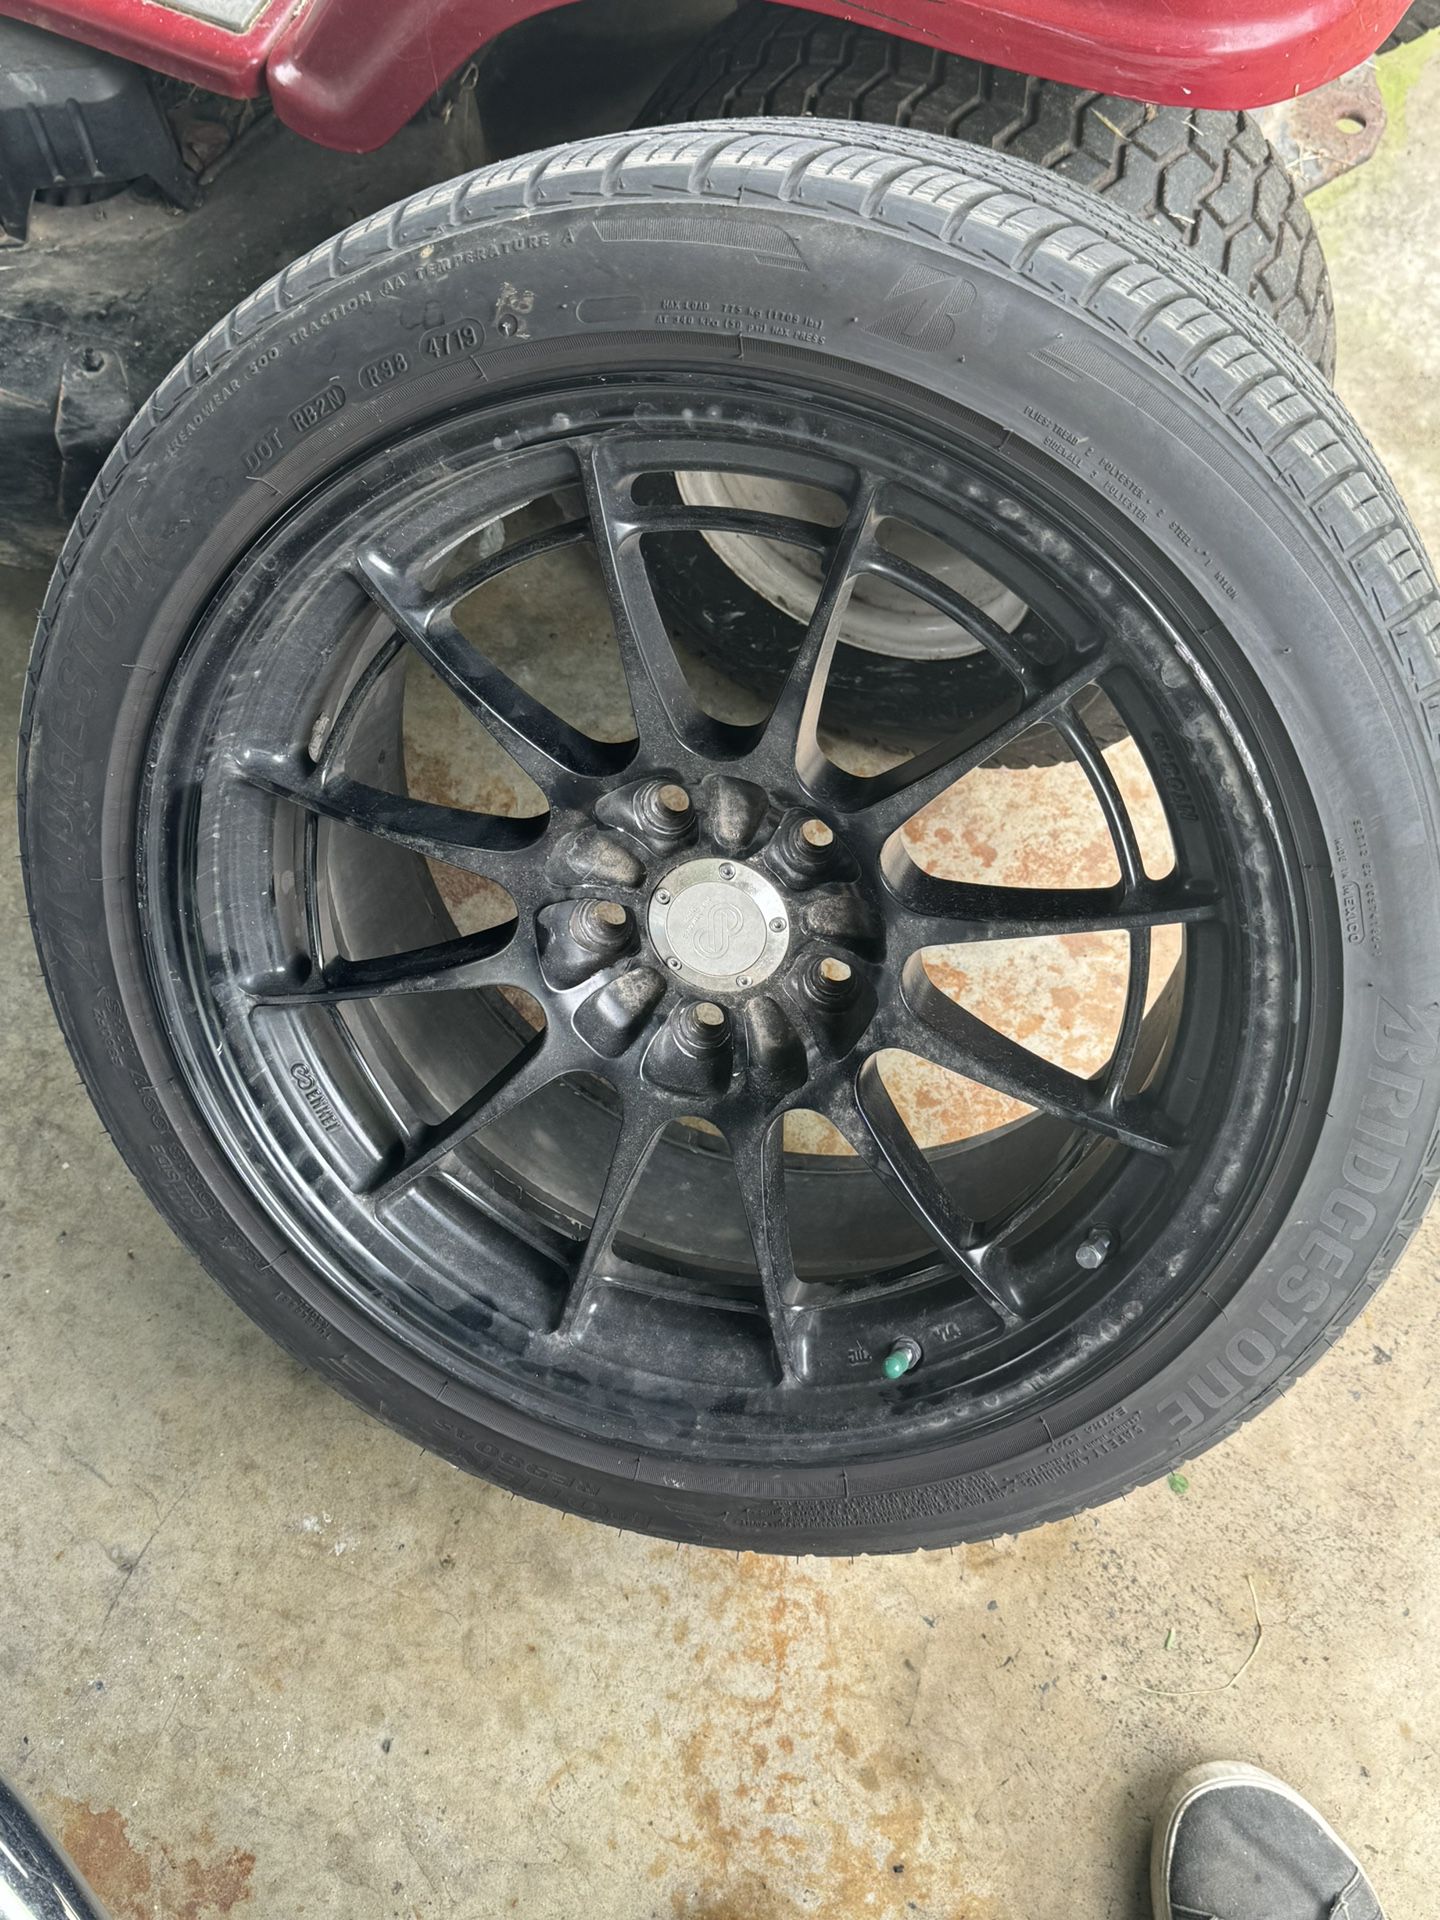 Set Of 4 Honda Wheels With Brand New Tires 